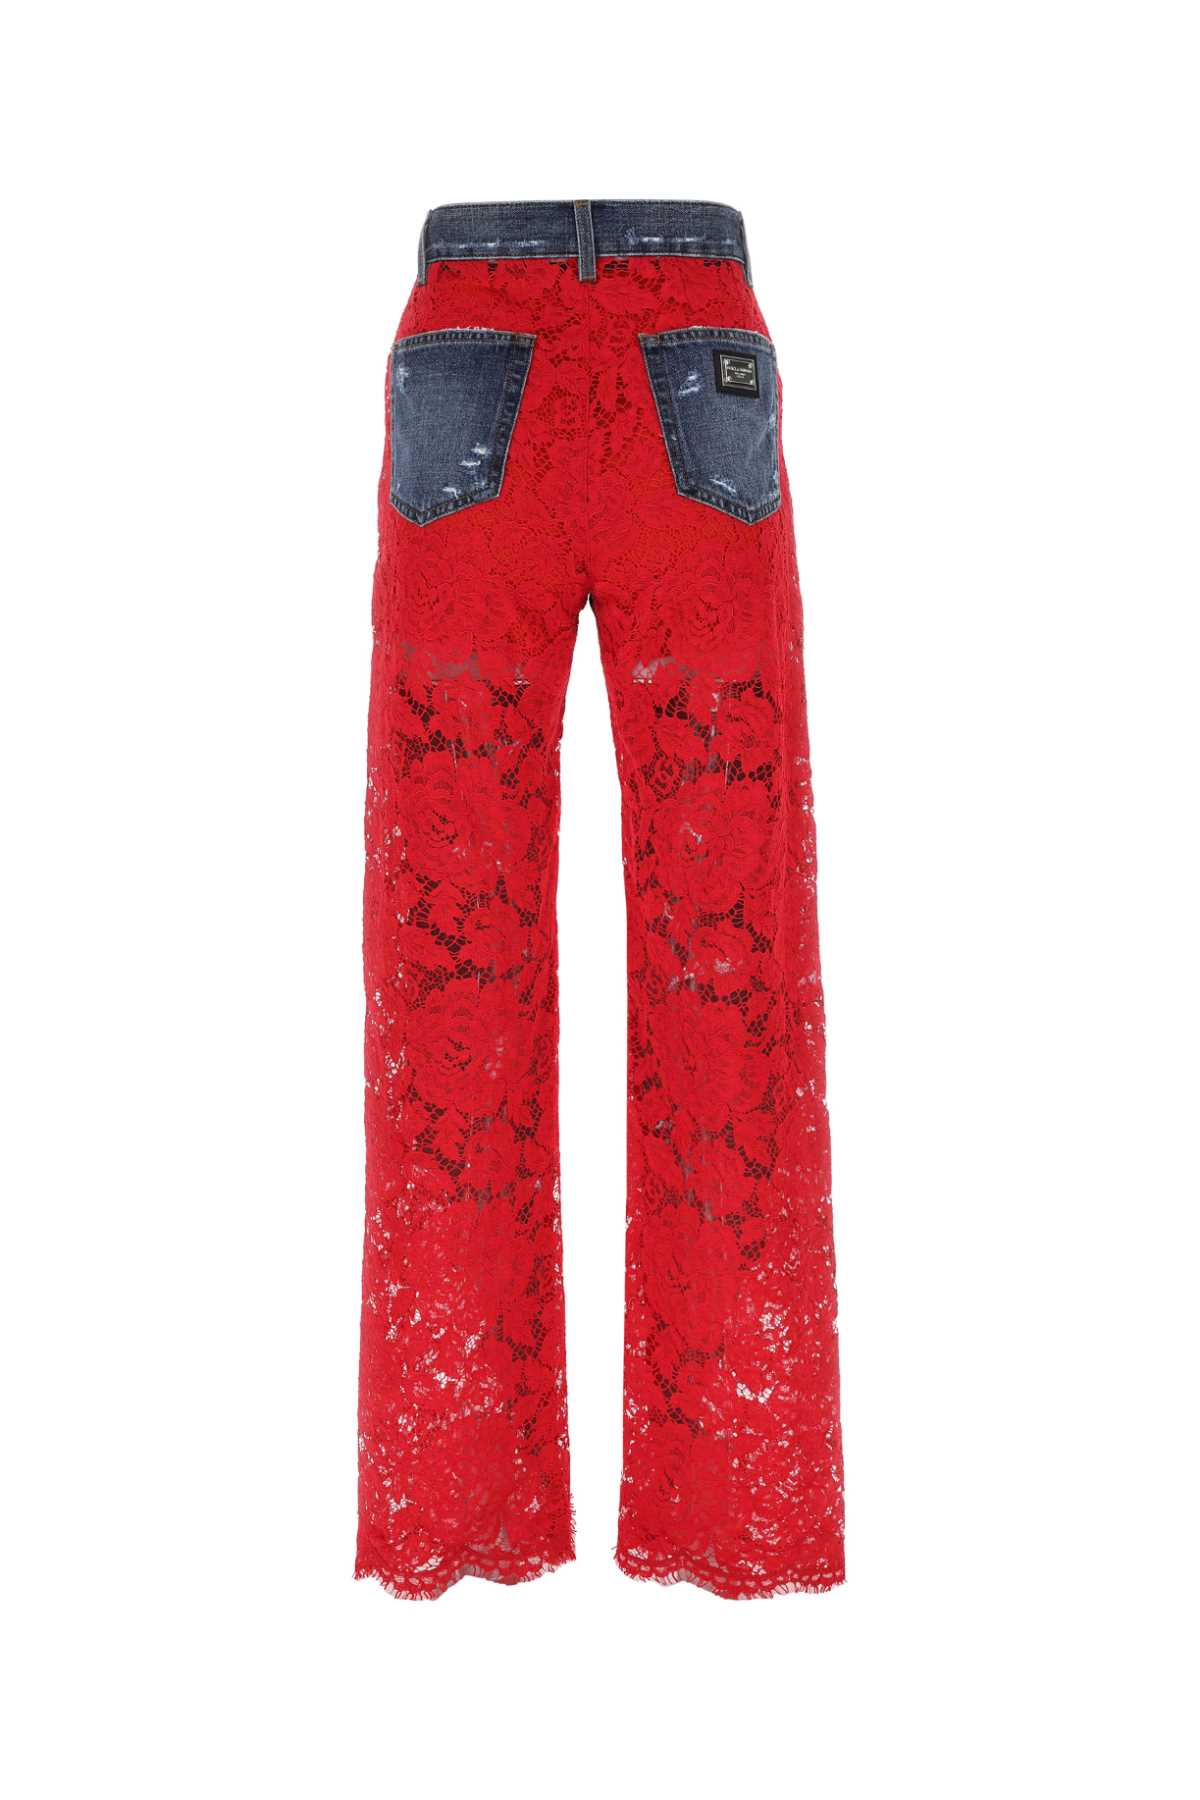 Dolce & Gabbana Two-tone Denim And Lace Jeans In Multicolor